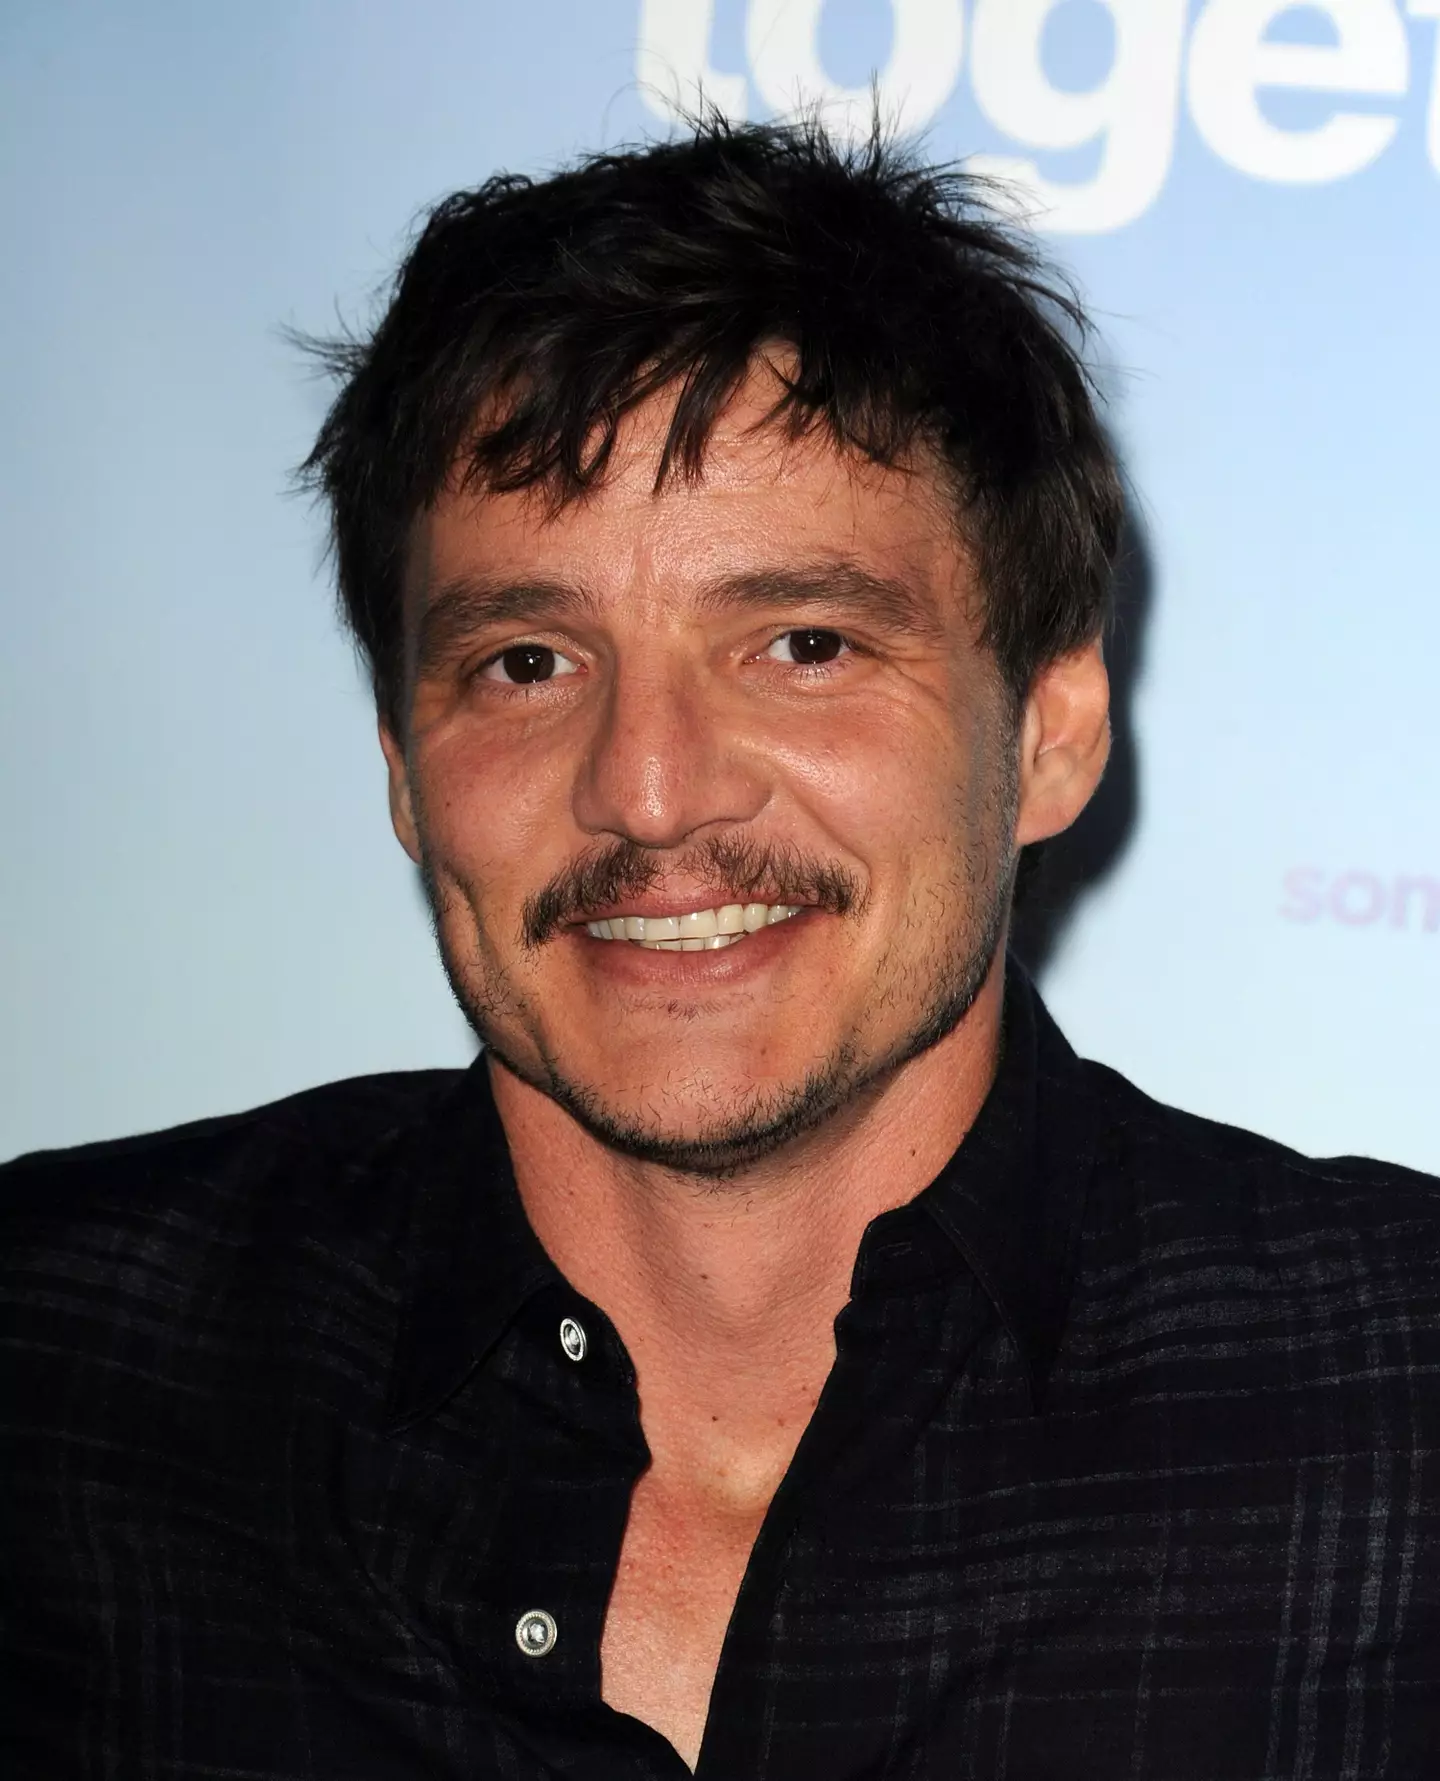 Pedro Pascal had quite a tragic time at the beginning of the 21st century.